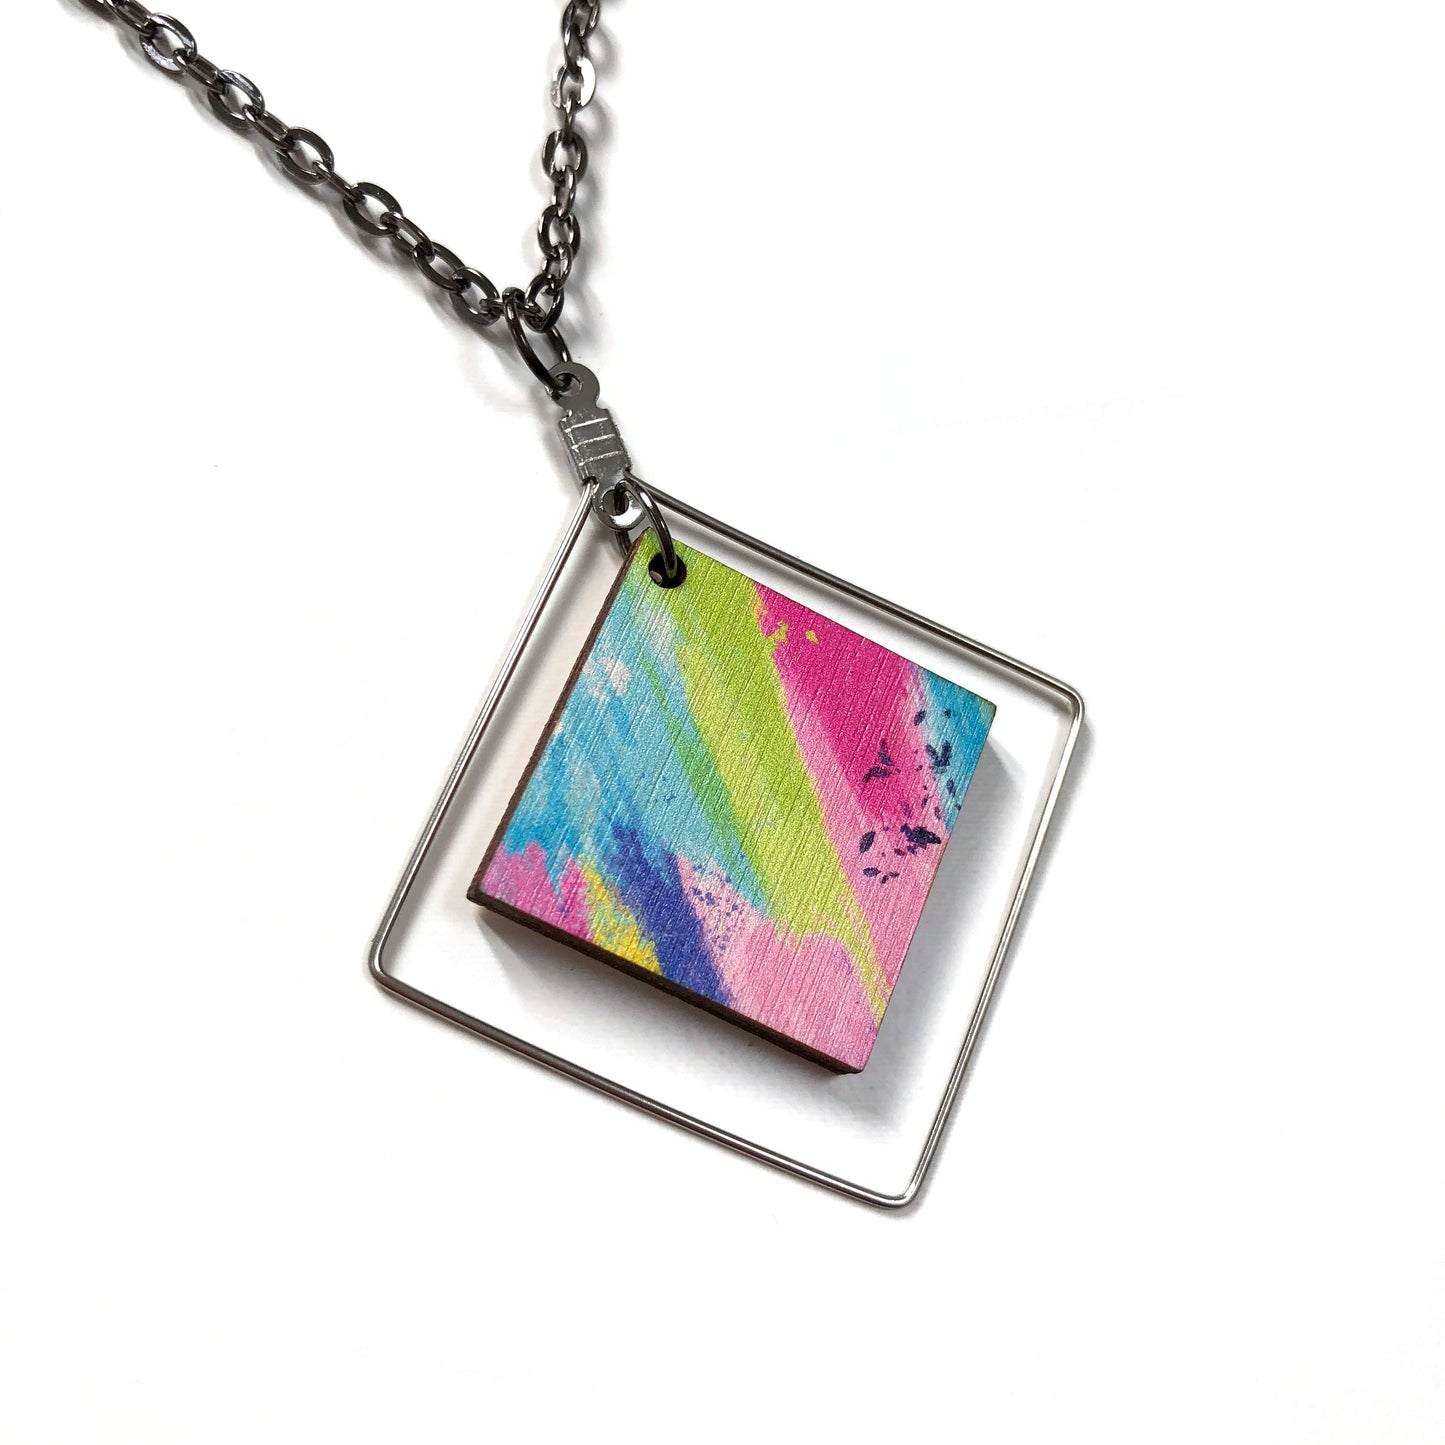 Blue abstract square pendant necklace